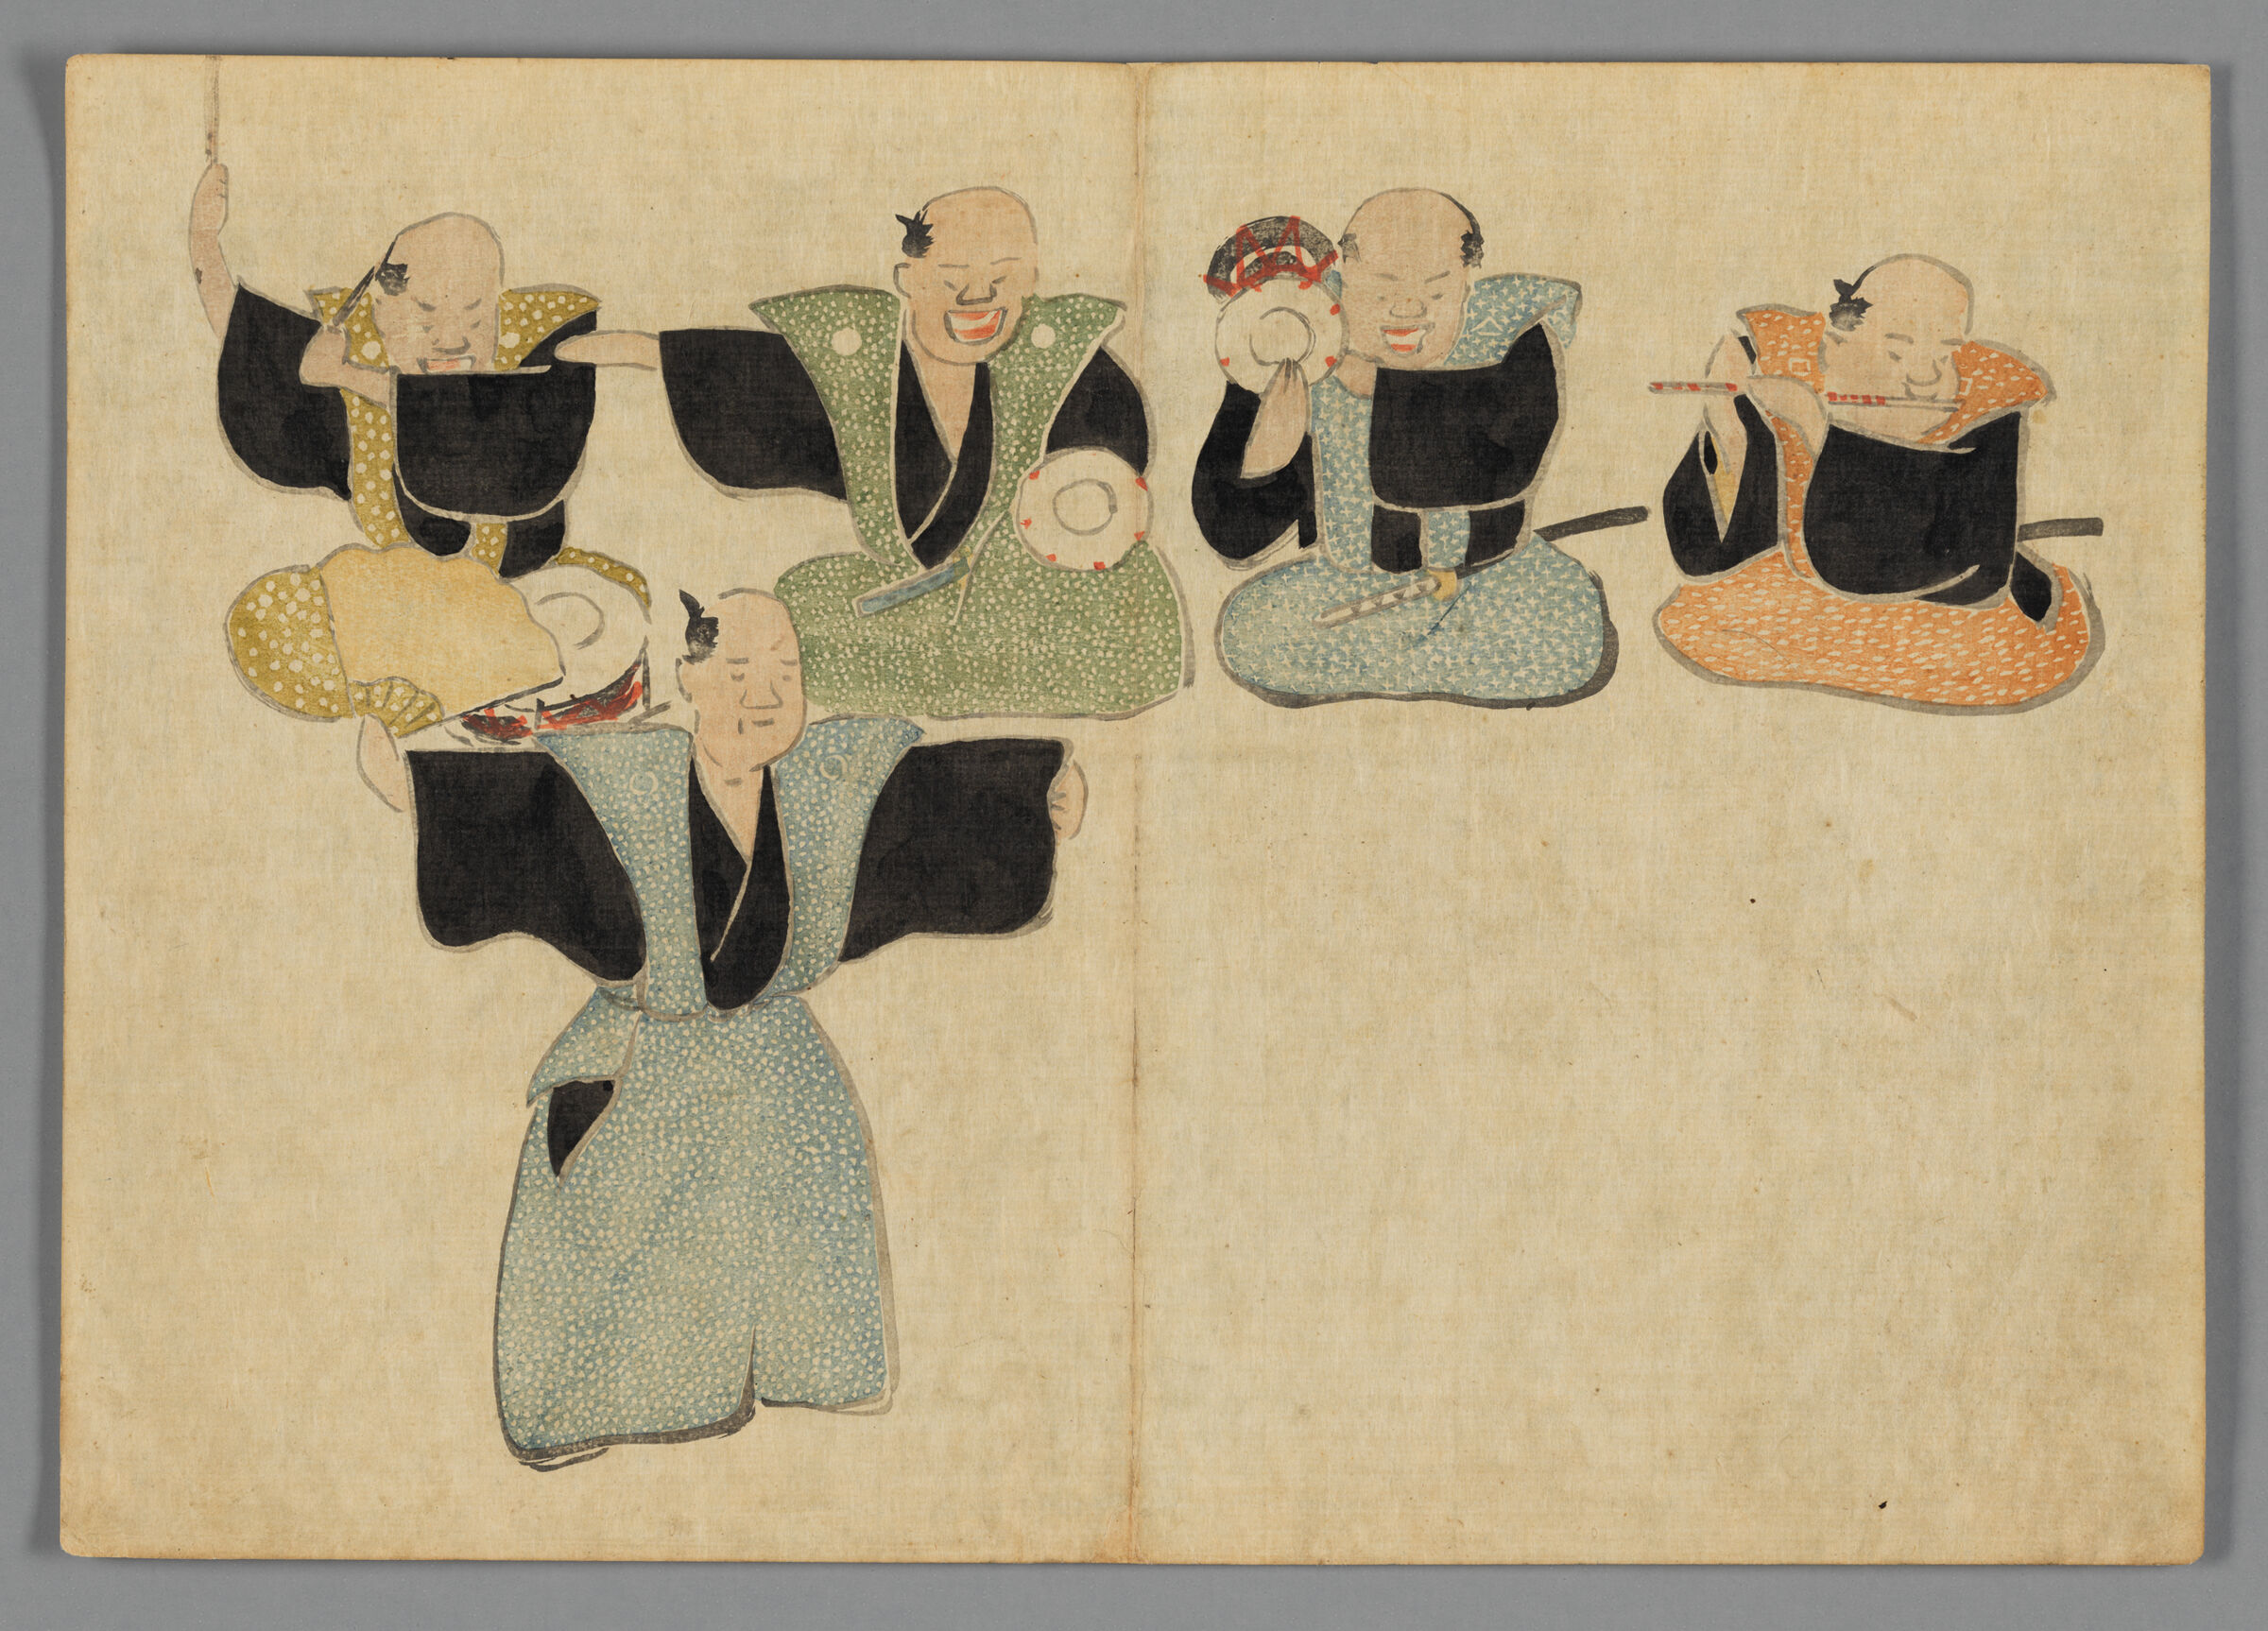 Nō Musicians And Dancer, From The Kōrin Gafu (Kōrin Picture Album)